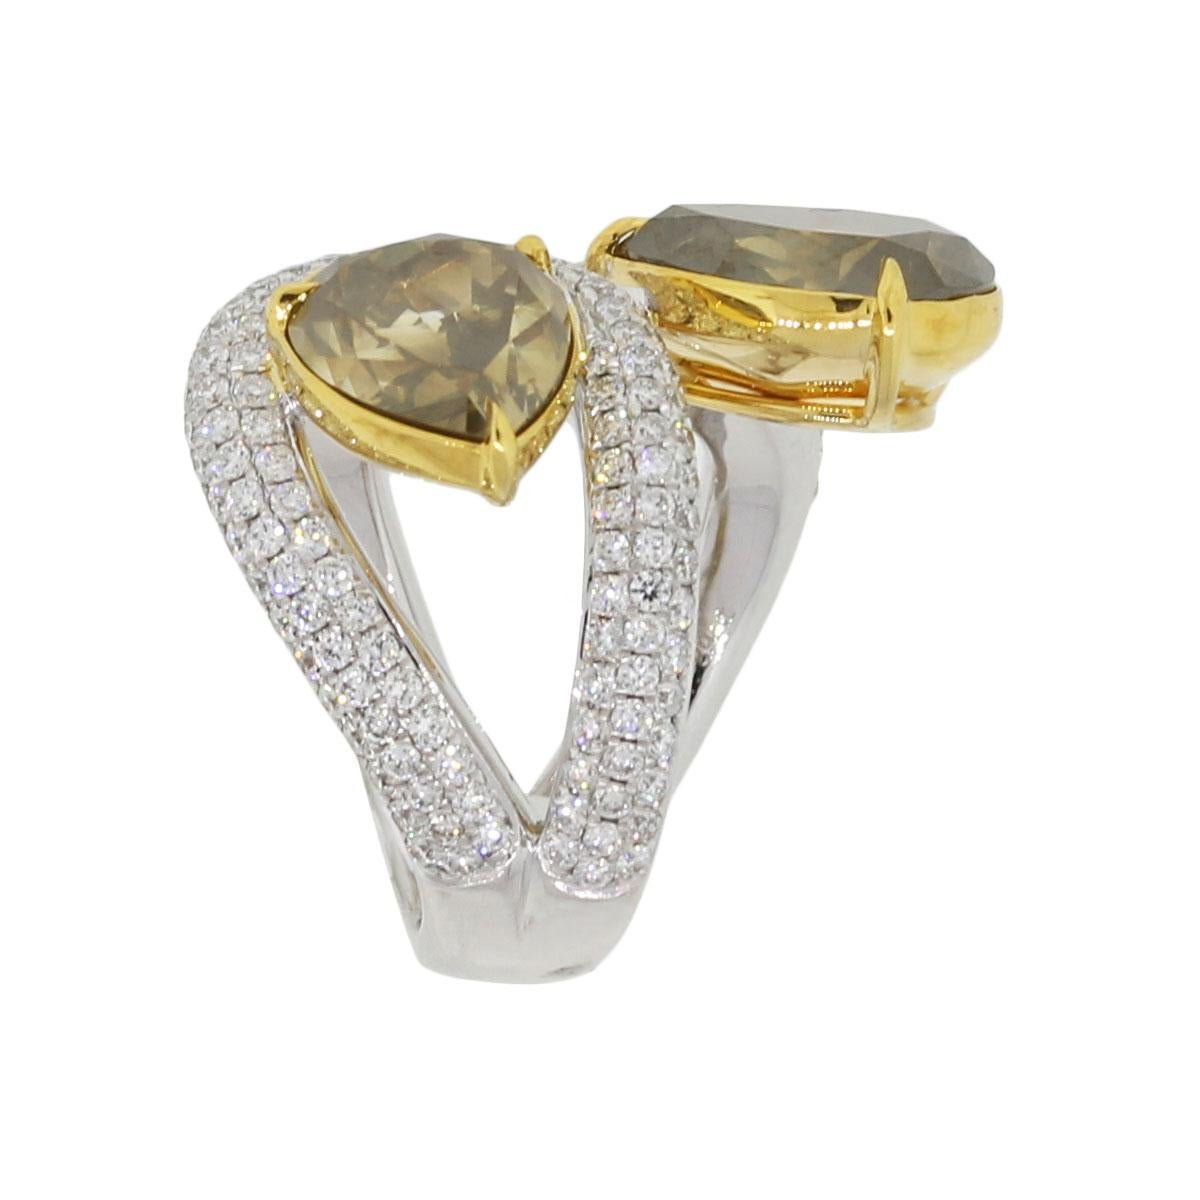 Material: 18k white gold
Diamond Details: GIA certified 4.81ct pear shape diamond. Diamond color is fancy dark brown-greenish yellow. GIA# 5161963436
                             GIA certified 3.72ct pear shape diamond. Diamond is fancy brown-yellow